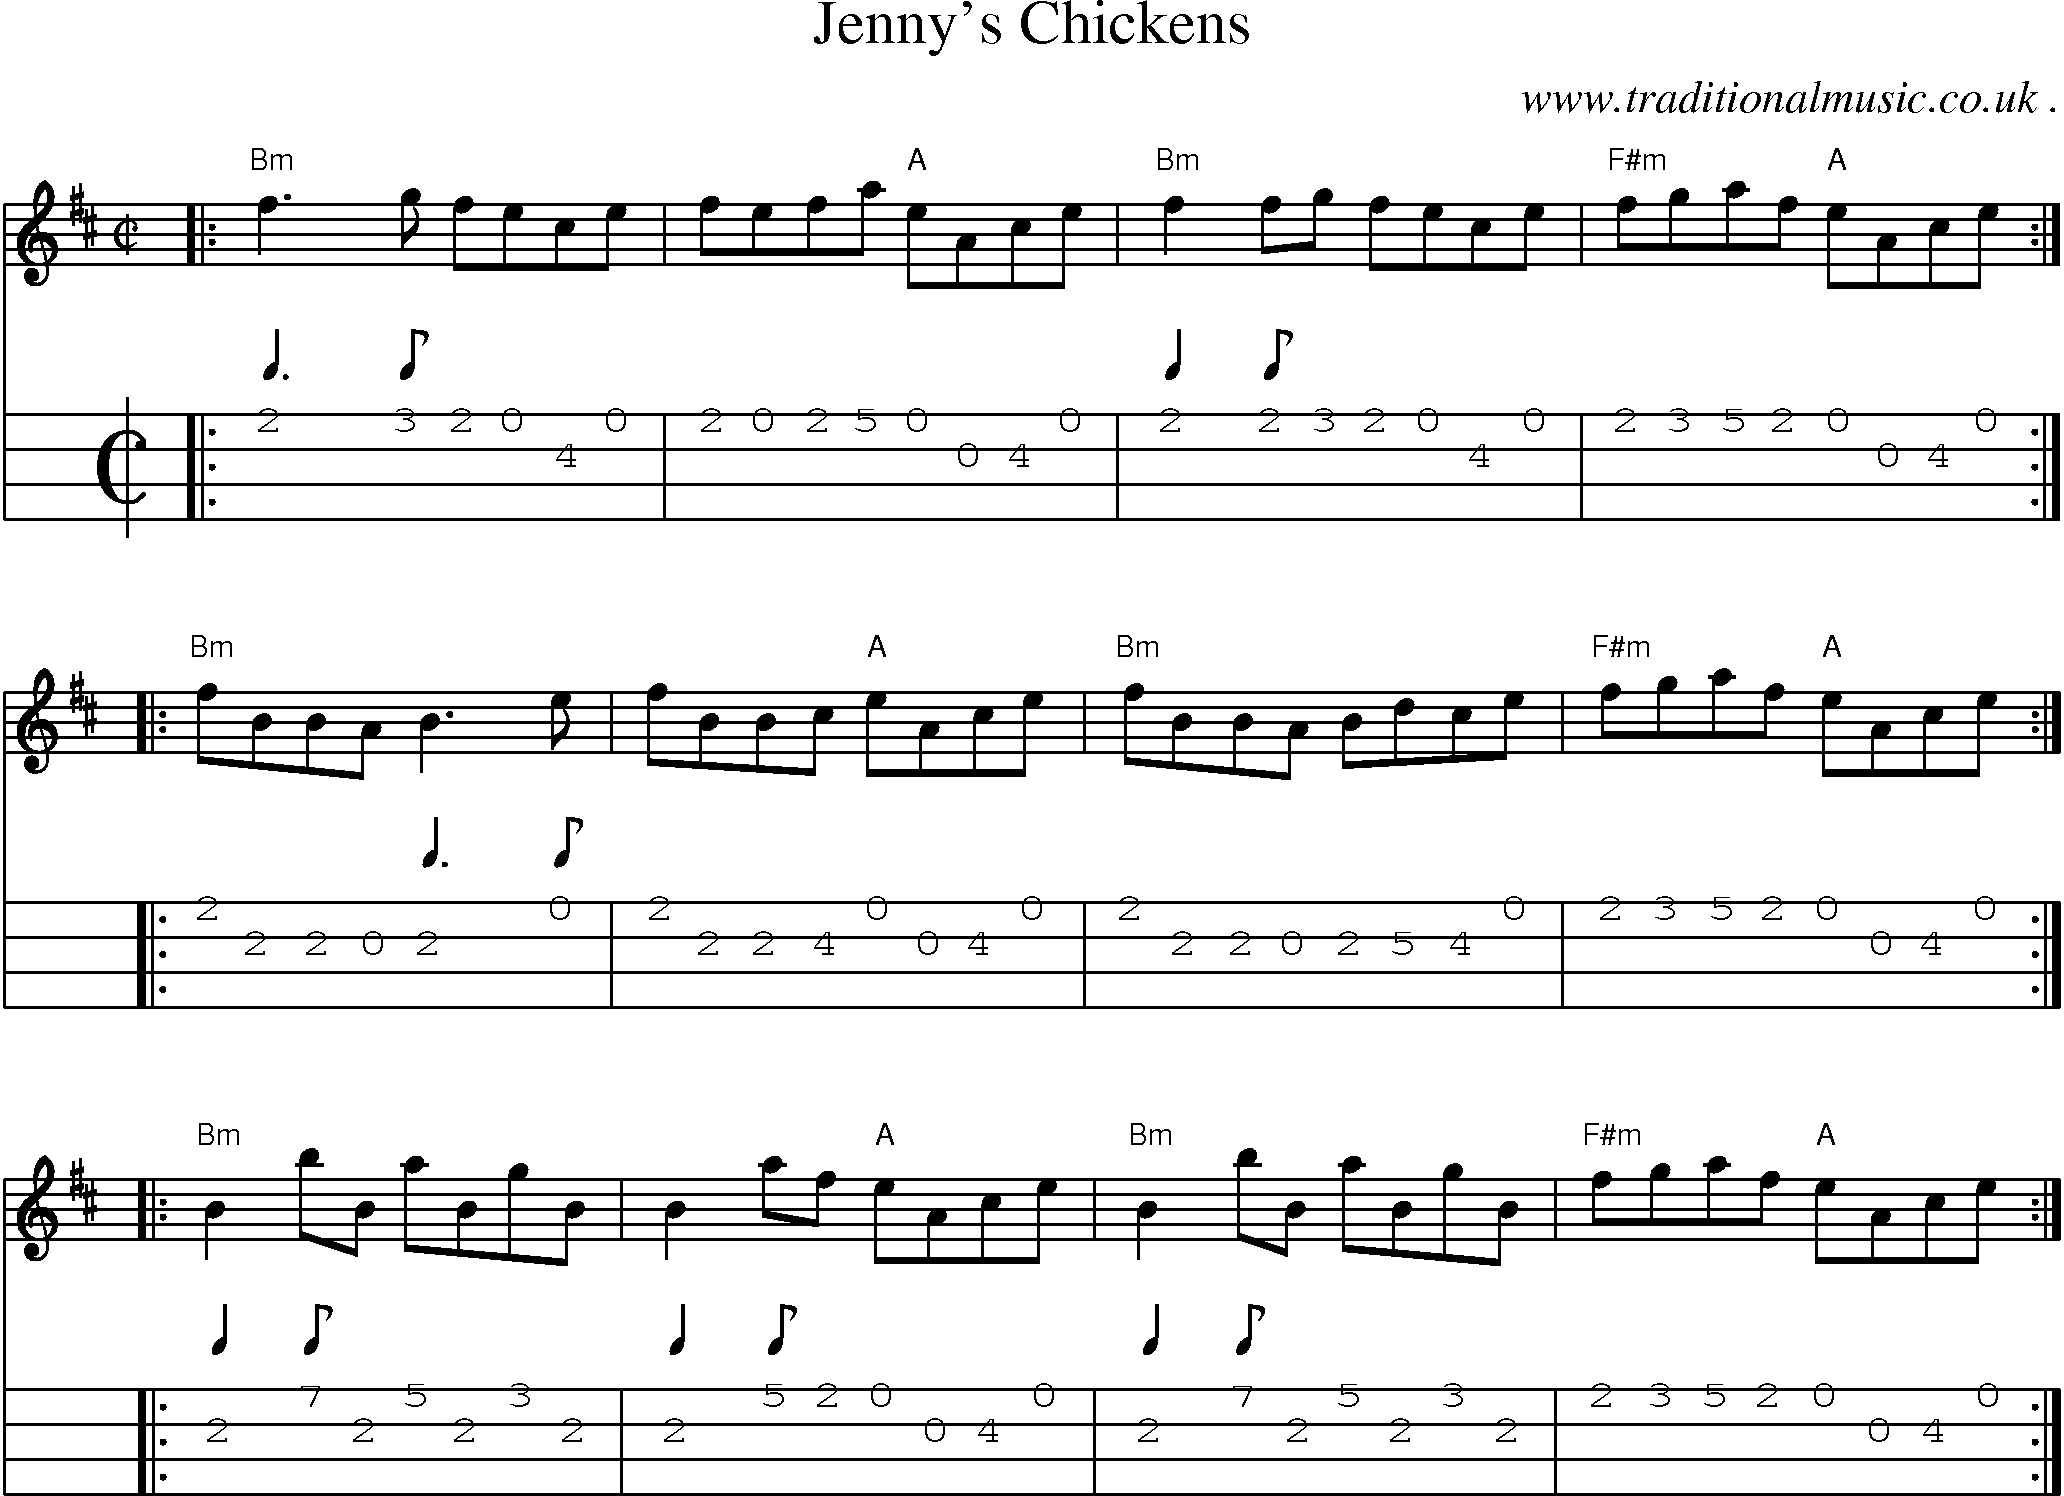 Sheet-music  score, Chords and Mandolin Tabs for Jennys Chickens